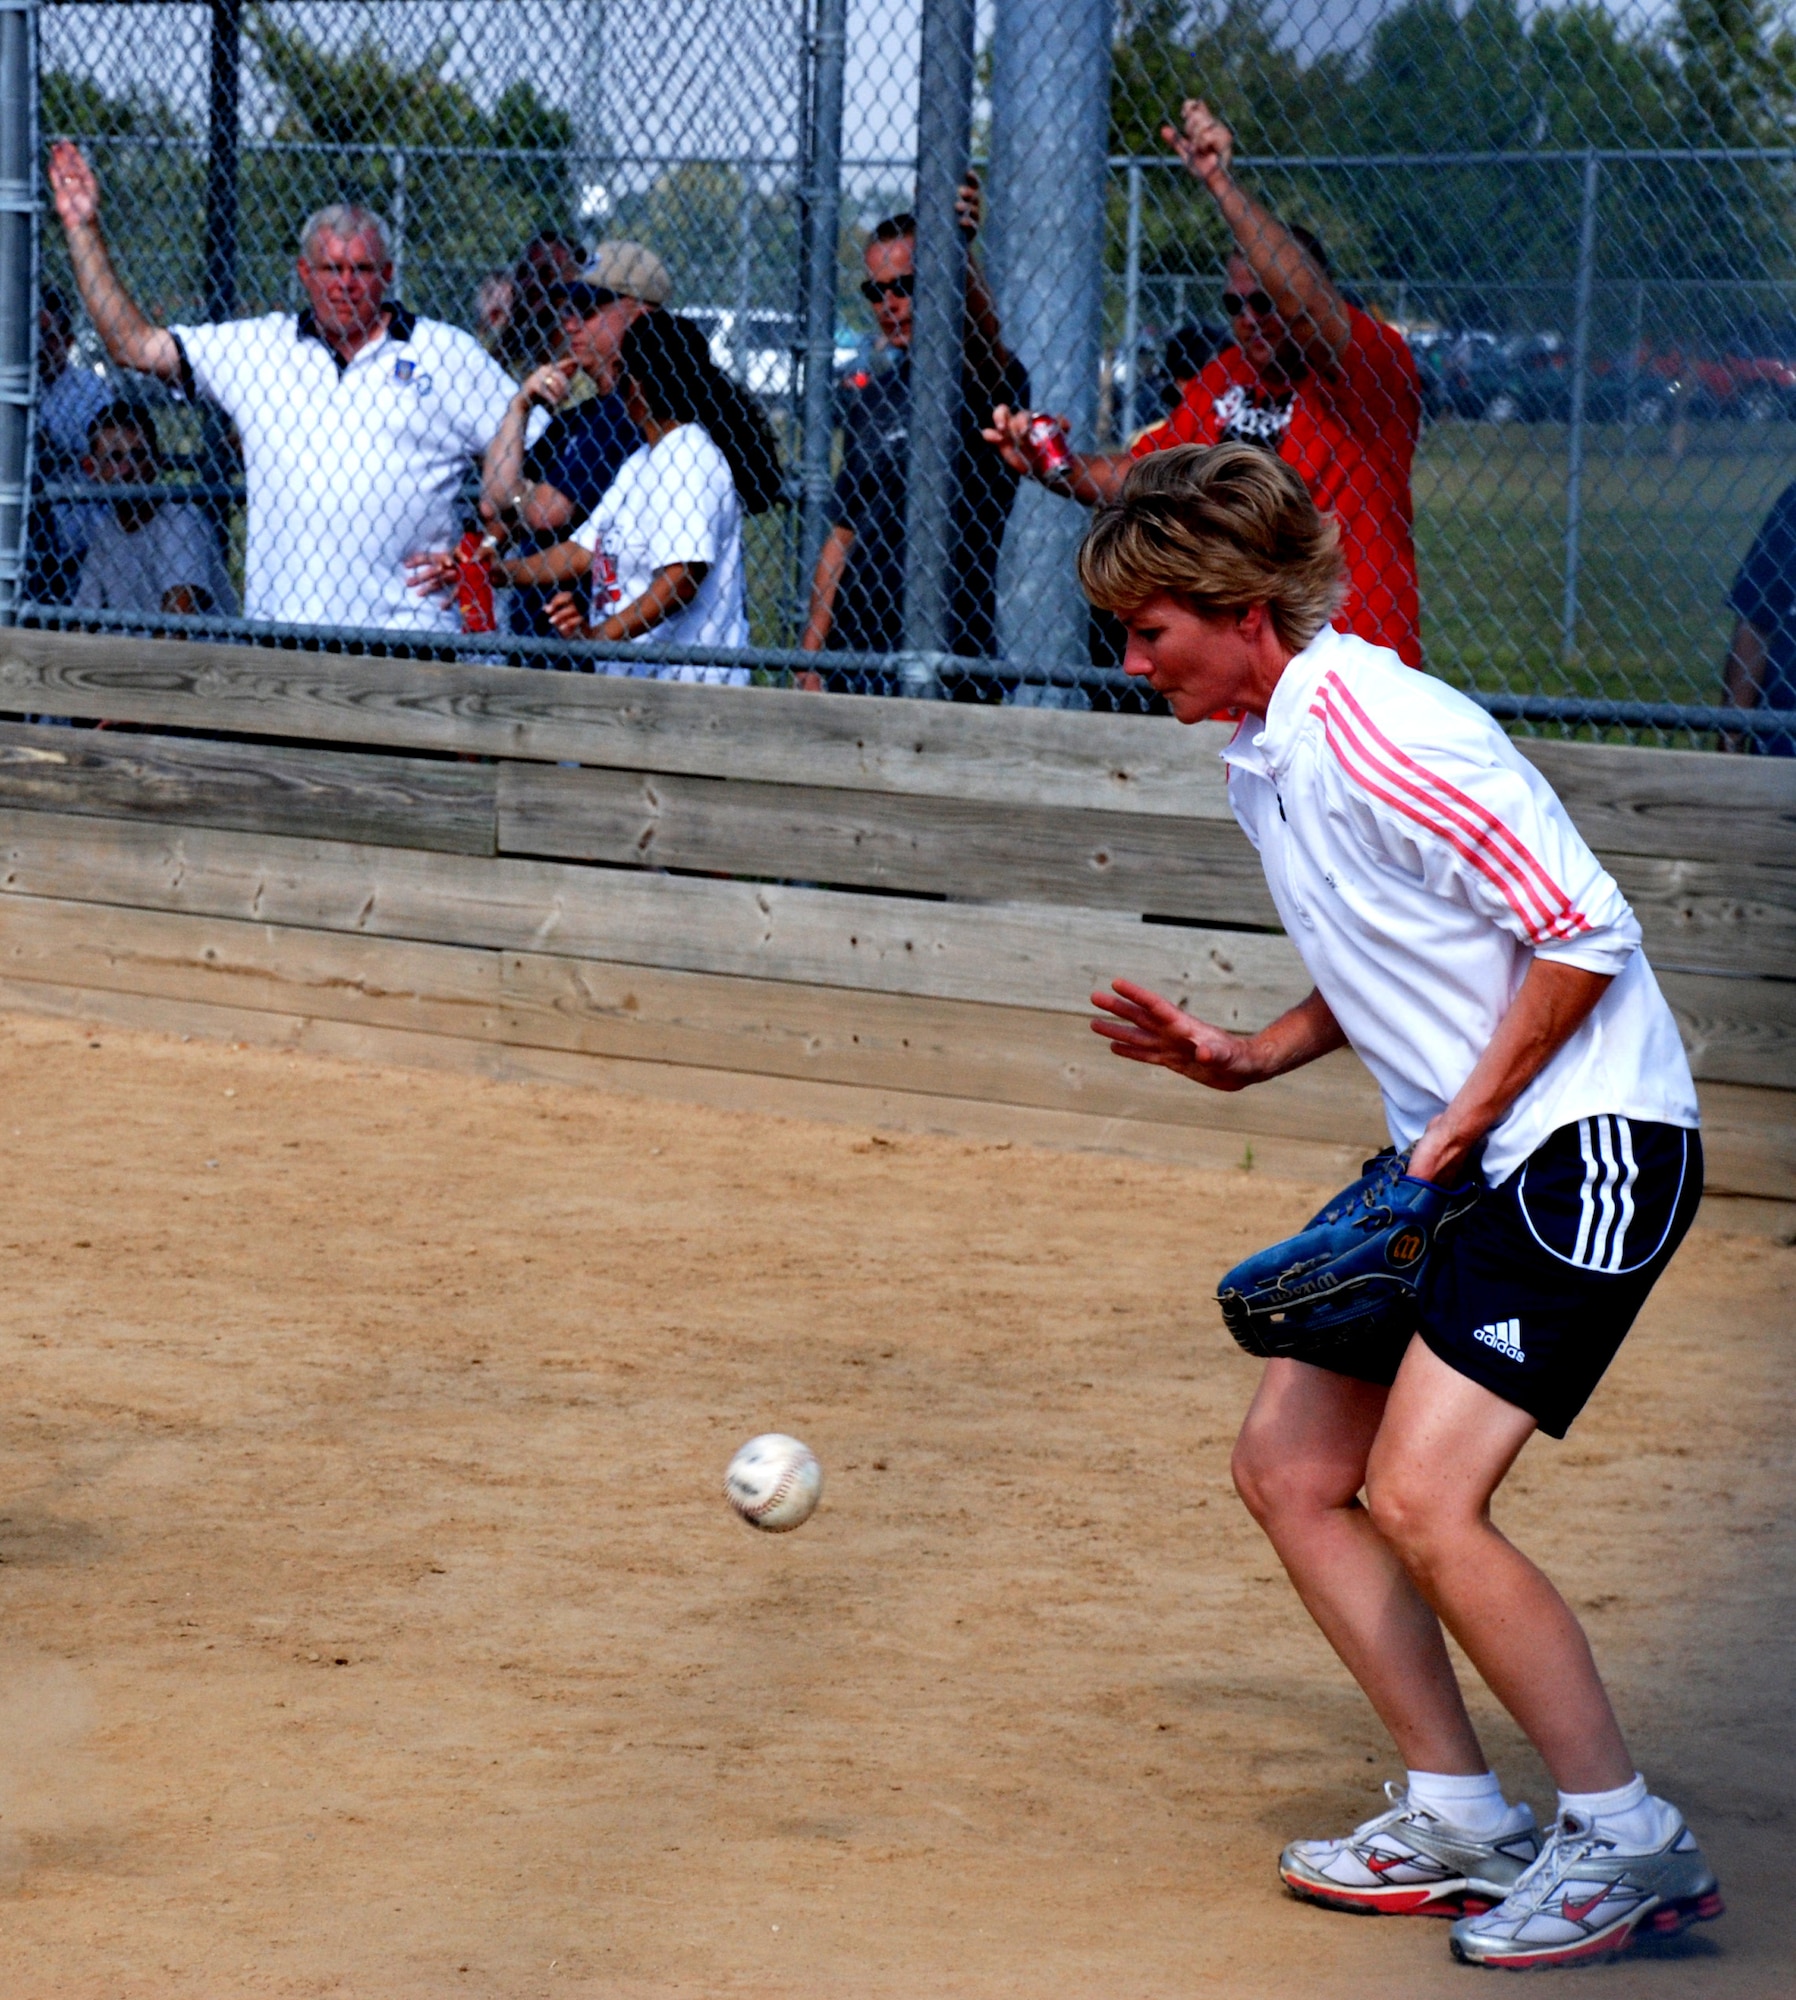 WOWZA!  Colonel Maryanne Miller keeps her eye on a wild pitch at the recent softball match.  Photo/ Capt. Stan Paregien